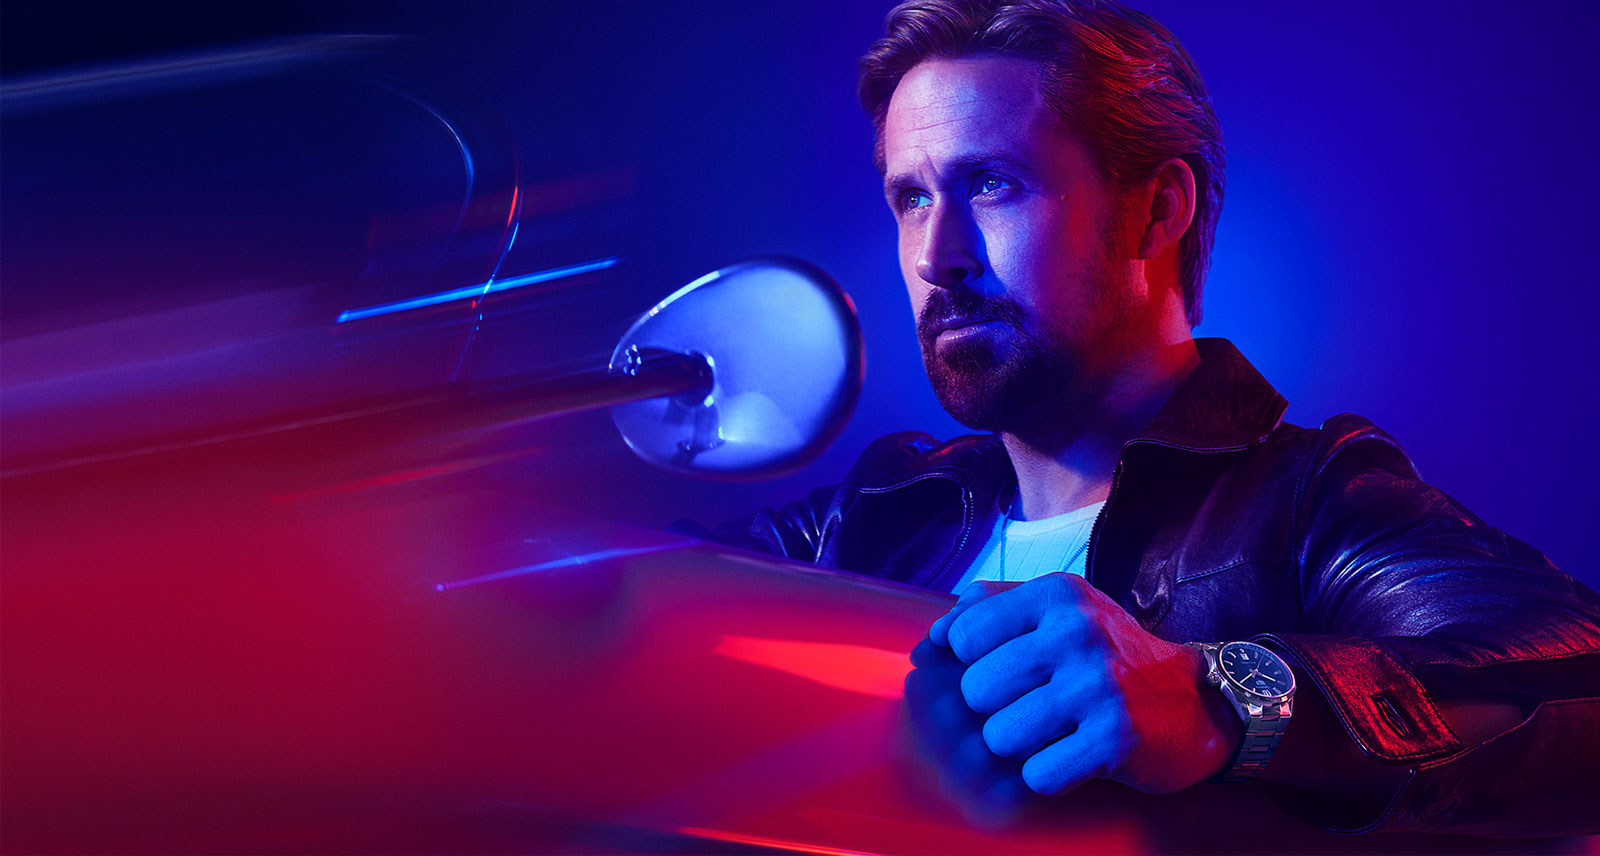 Ryan Gosling Gets Behind the Wheel for TAG Heuer